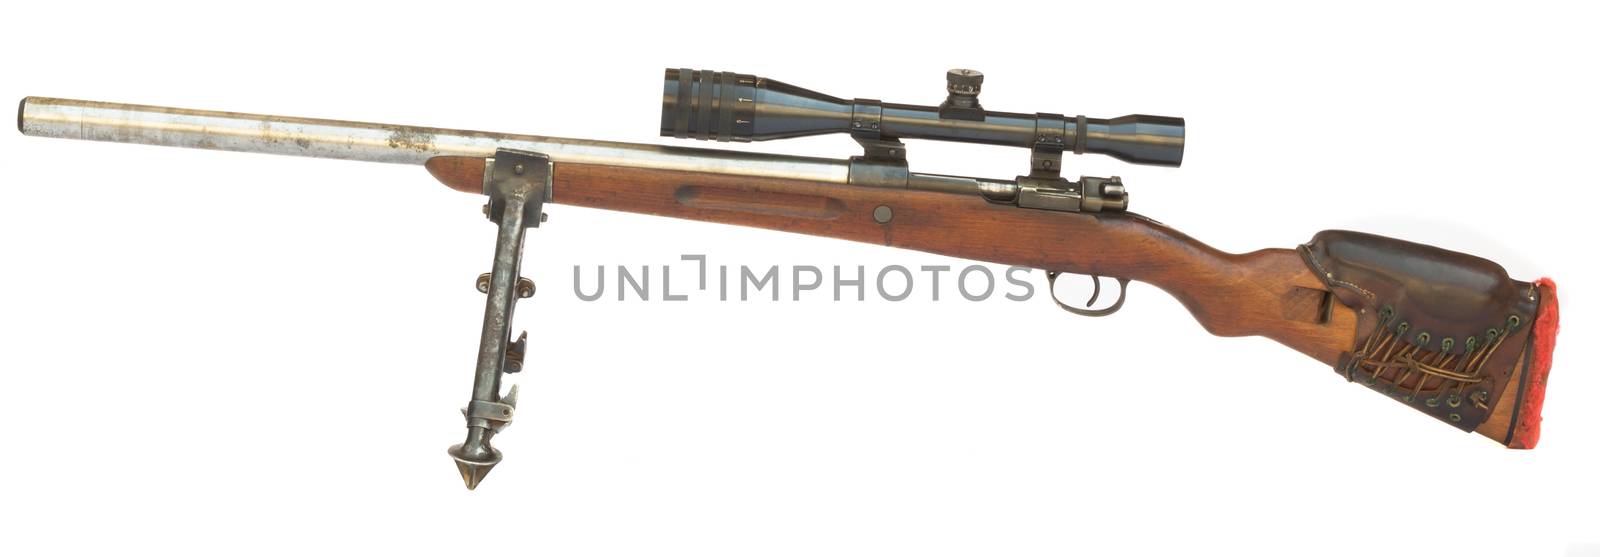 Old Sniper Rifle by orcearo